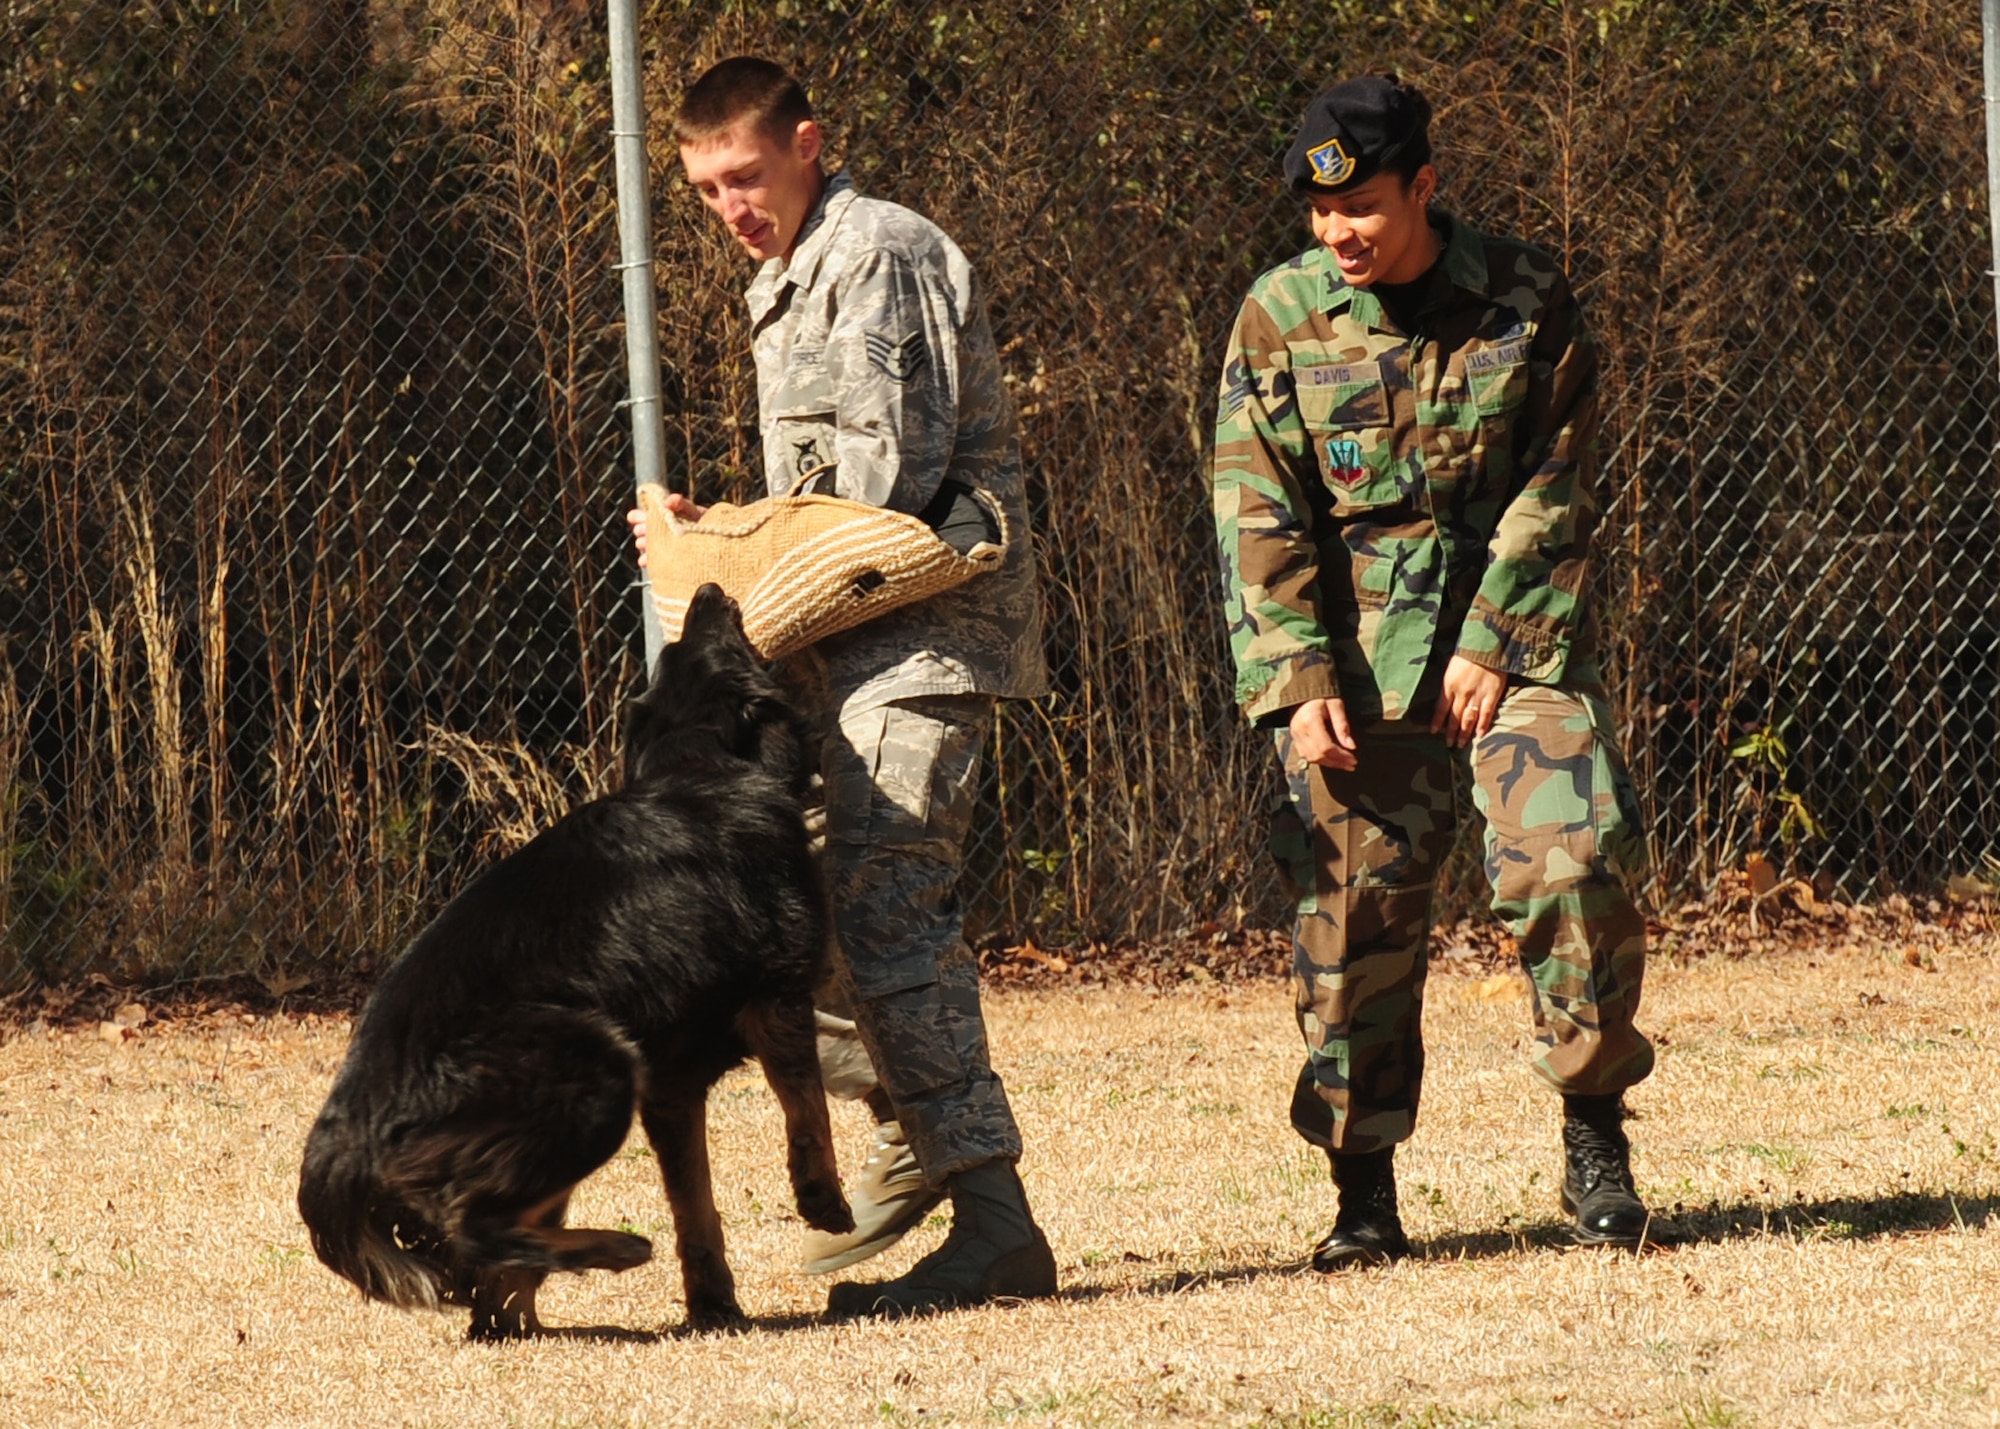 Senior Airman Ava Davis, her canine Frisco and Staff Sergeant Andrew Rounds, 4th Security Forces Squadron Canine Unit, demonstrate the six phases of aggression at Seymour Johnson Air Force Base, N.C. March 4, 2009. Airman Davis and Frisco participated in the 916th Air Refueling Wing’s nuclear operational readiness inspection where the pair was recognized as outstanding performers by the Air Mobility Command Inspector General. (U.S. Air Force Photo by Airman 1st Class Rae A. Perry)